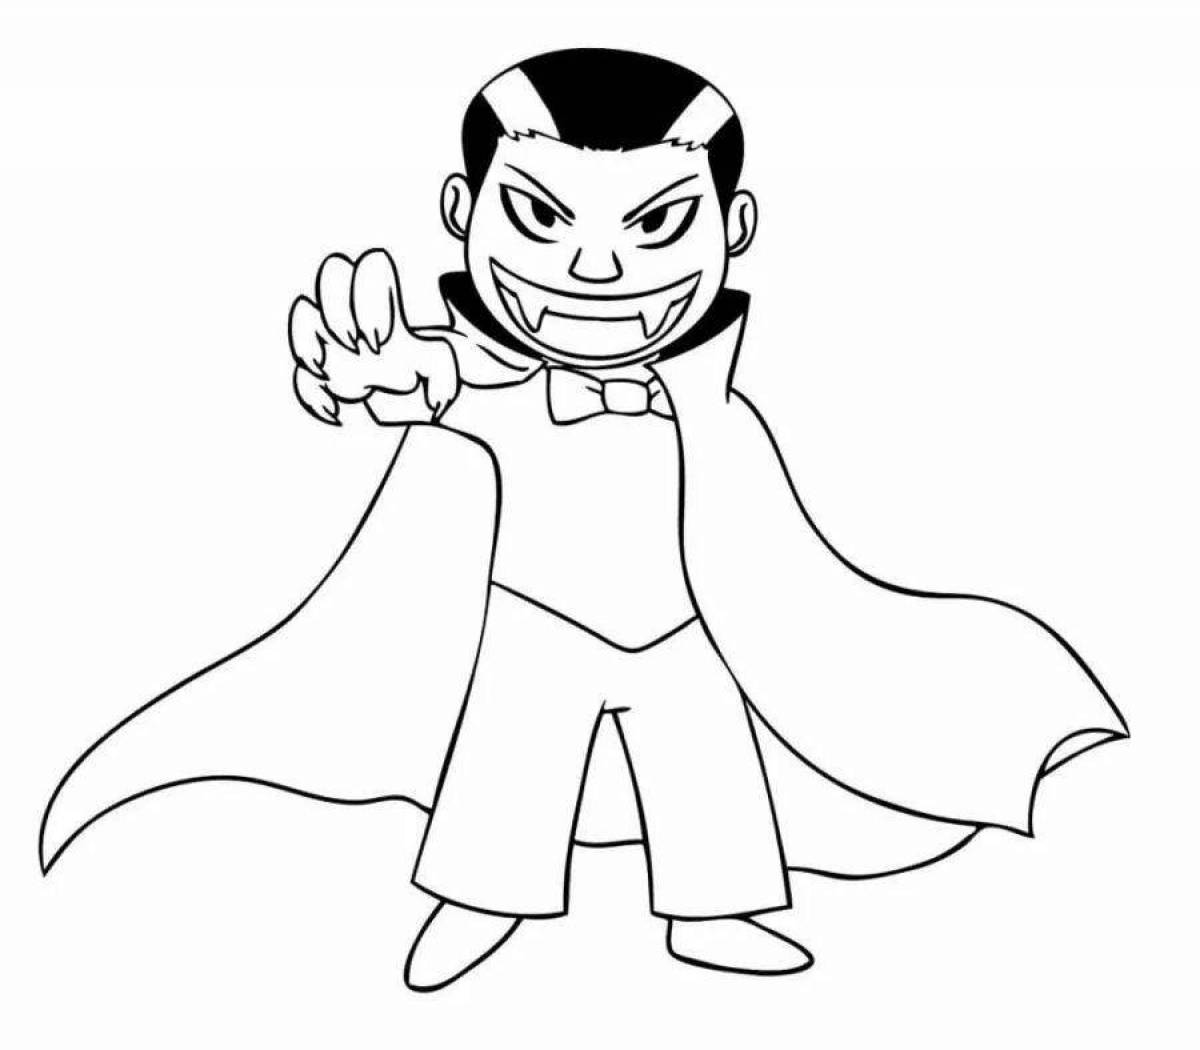 Terrifying vampire coloring page for kids